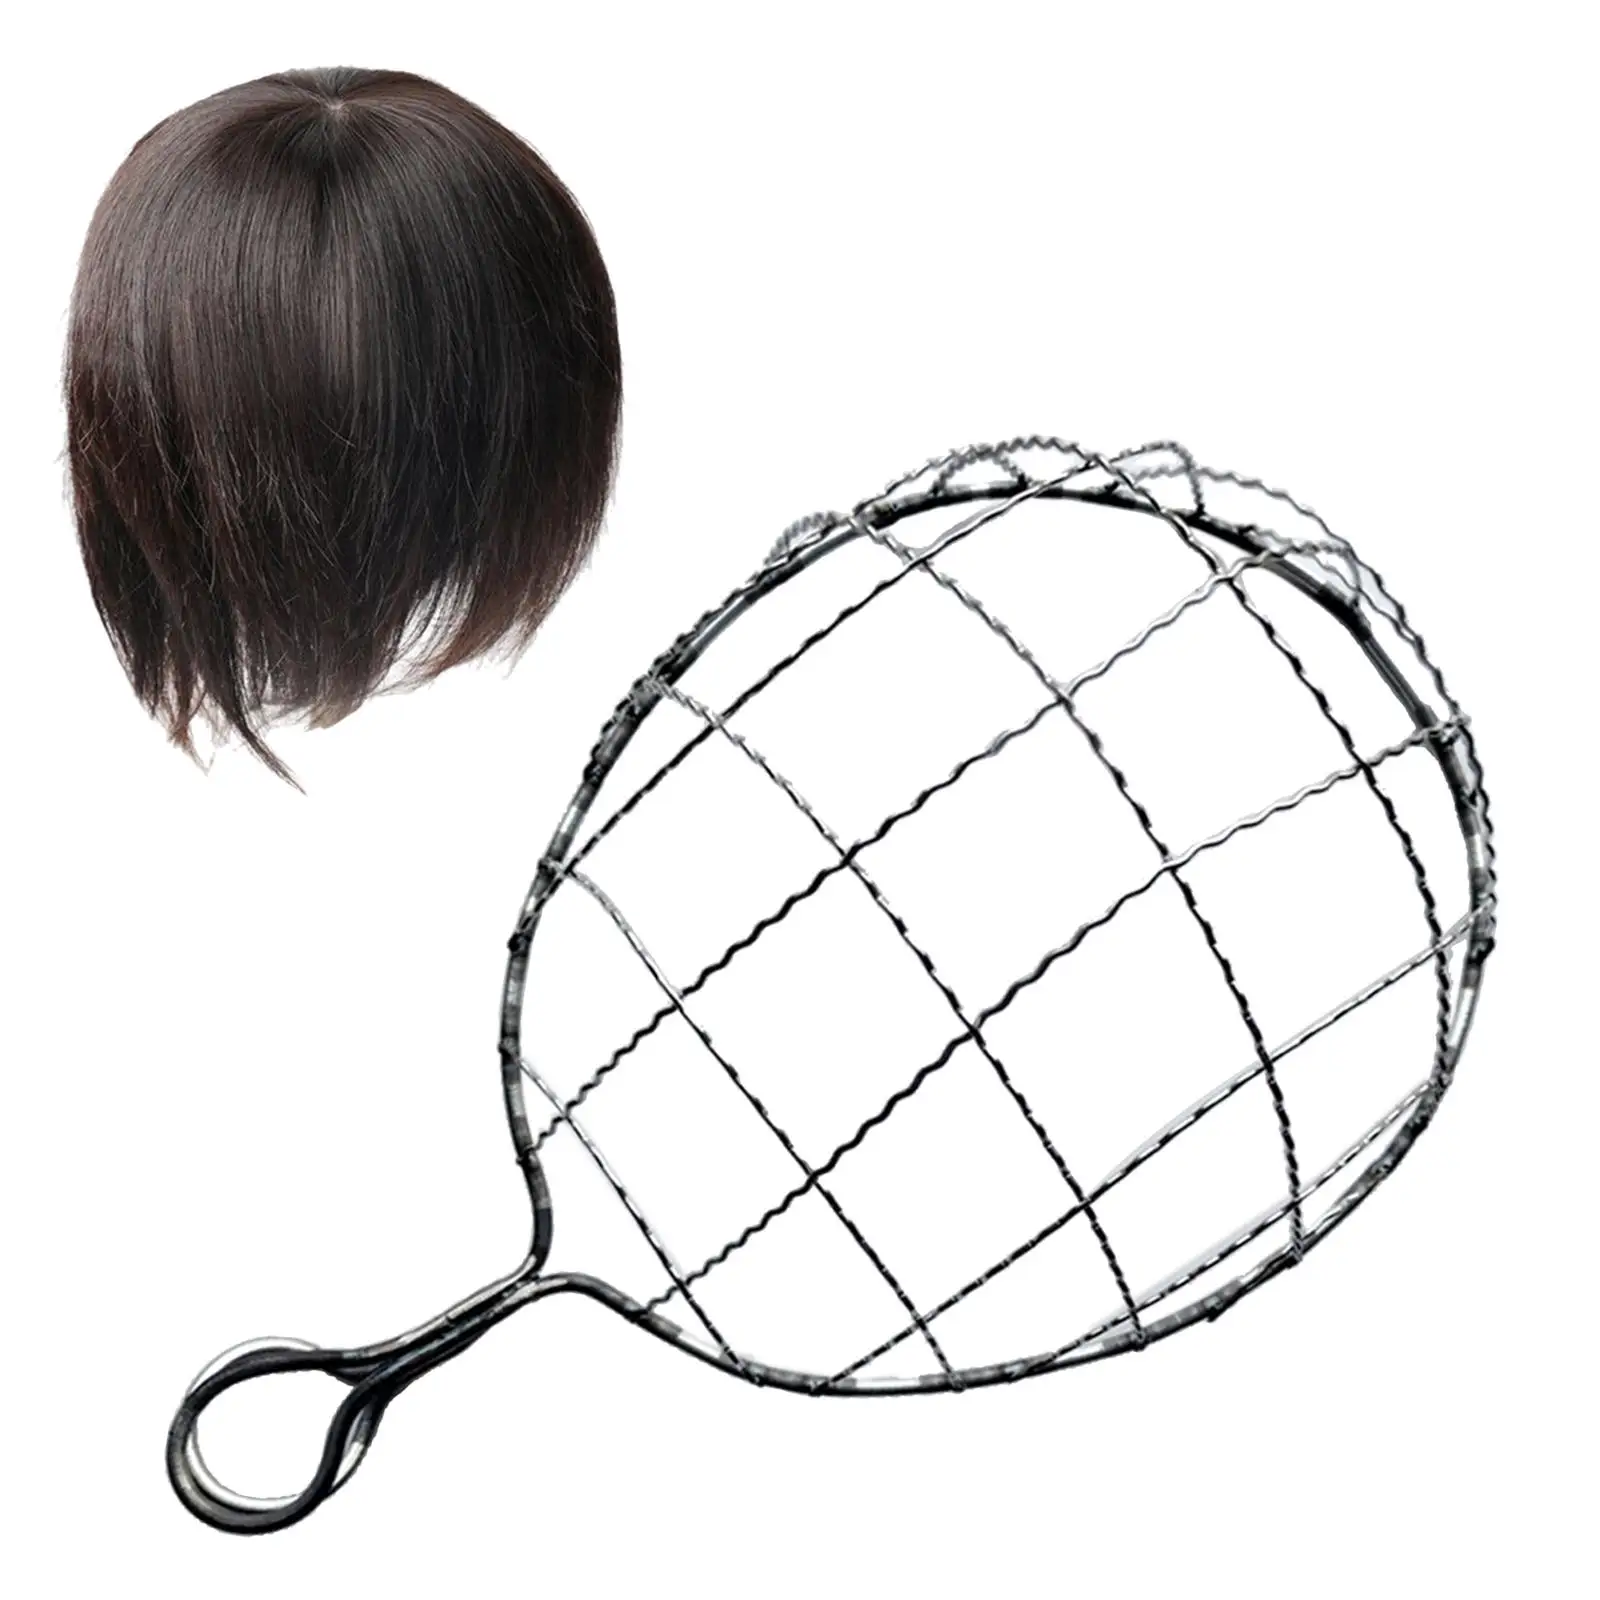 Wig Display Stand Hat Display Stand Wig Accessories Wig Dryer Hairpieces Display Tool Wig Head Holders